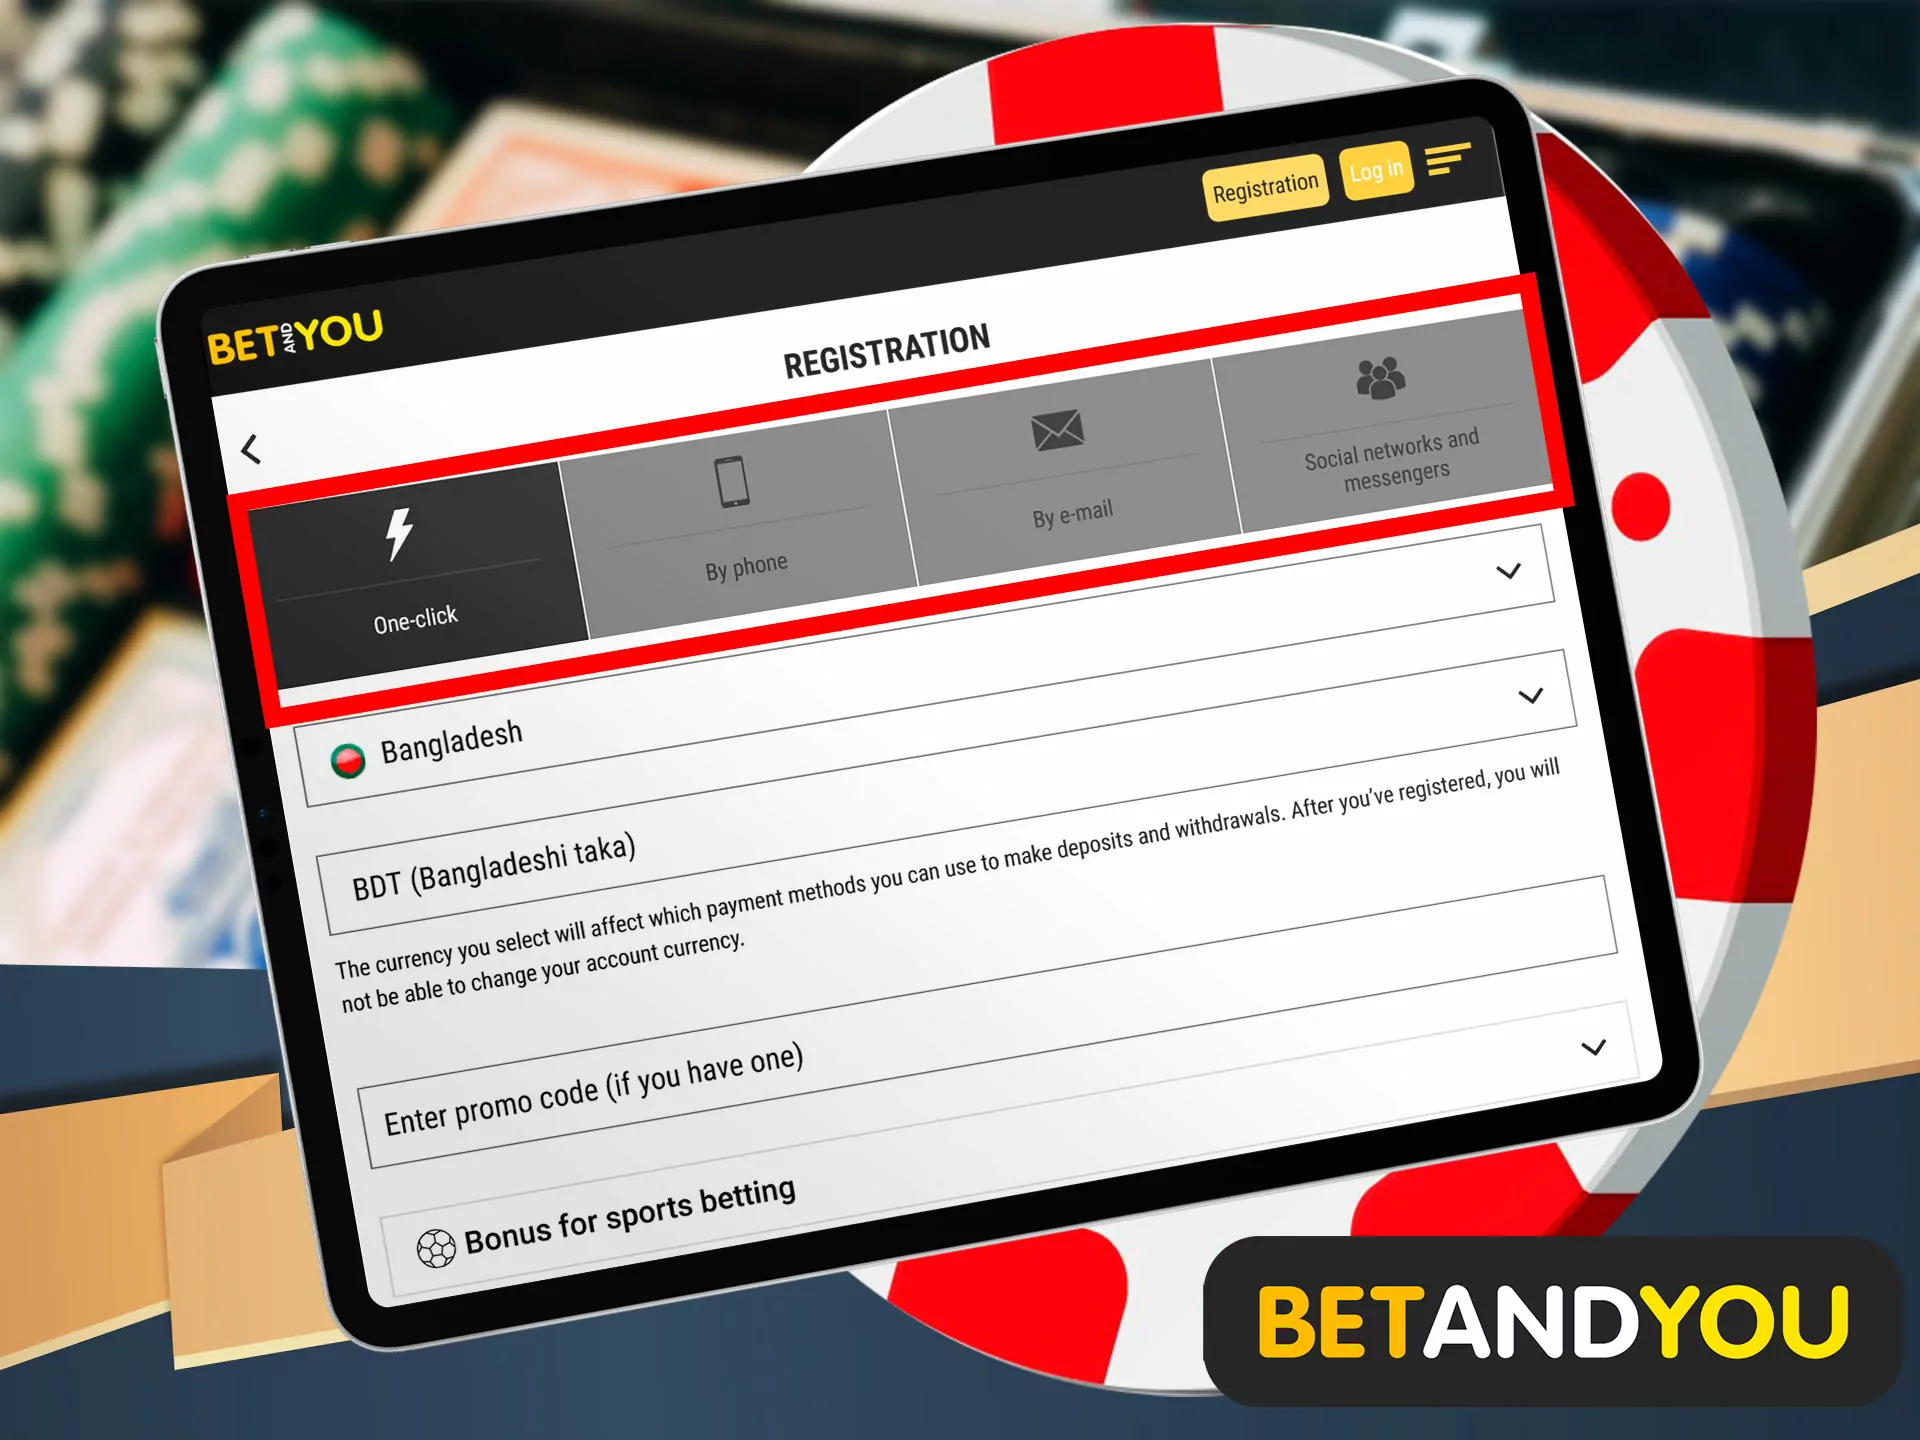 Then determine the type of registration, there are only 4 of them, just click on the required tab, then fill in the required data, they will be useful in the future for authorization at Betandyou casino.